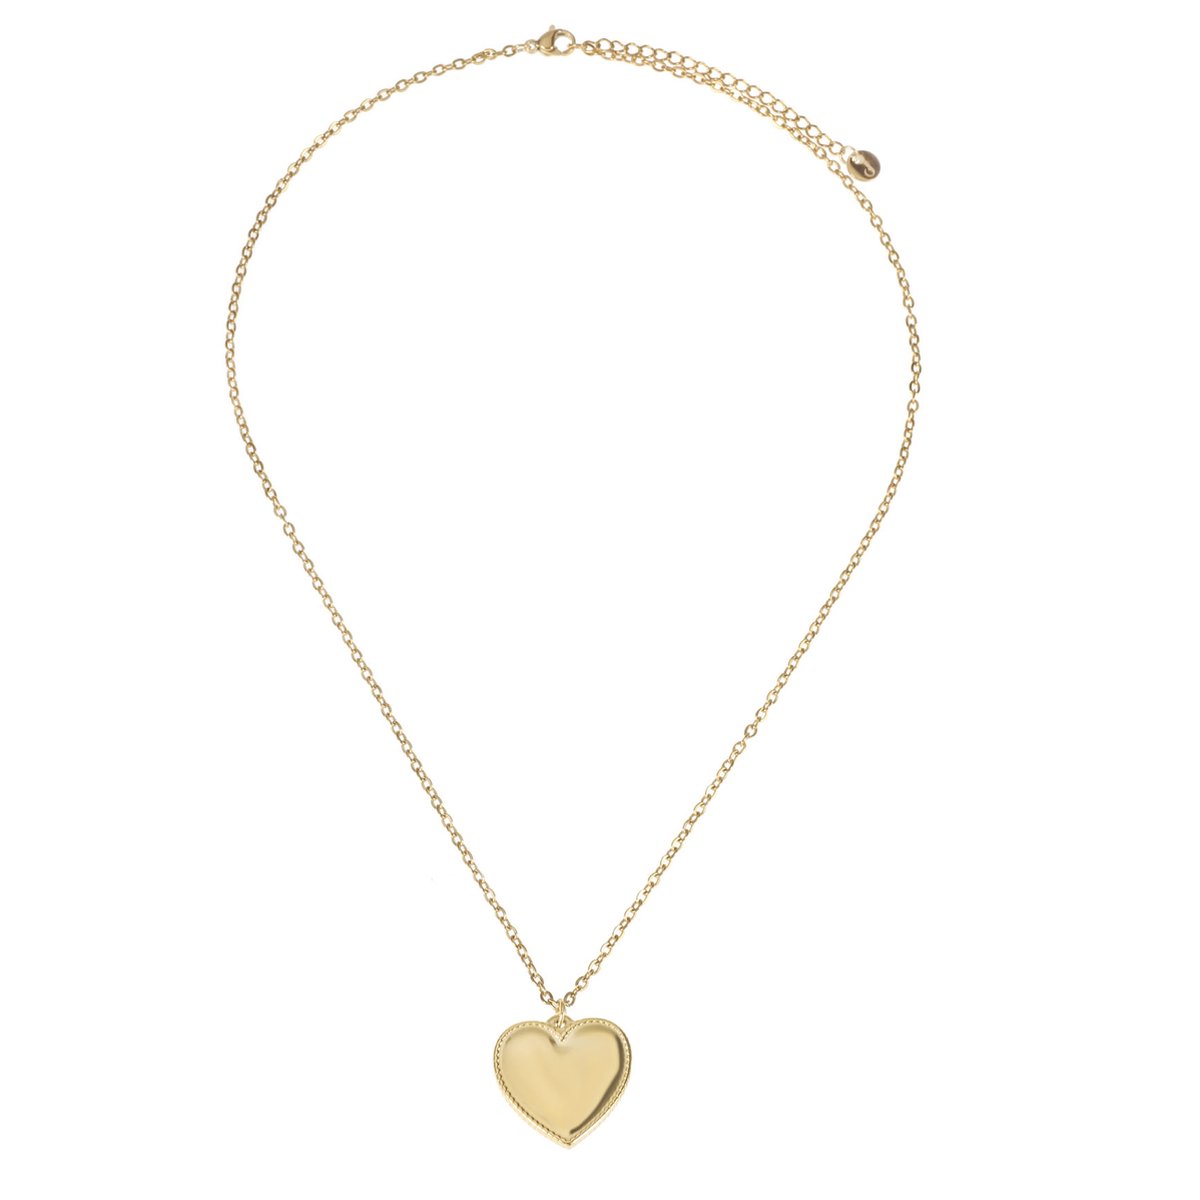 The Jewellery Club - Liz heart necklace gold - Ketting - Dames ketting - Stainless steel - Hart- Goud - 45 cm